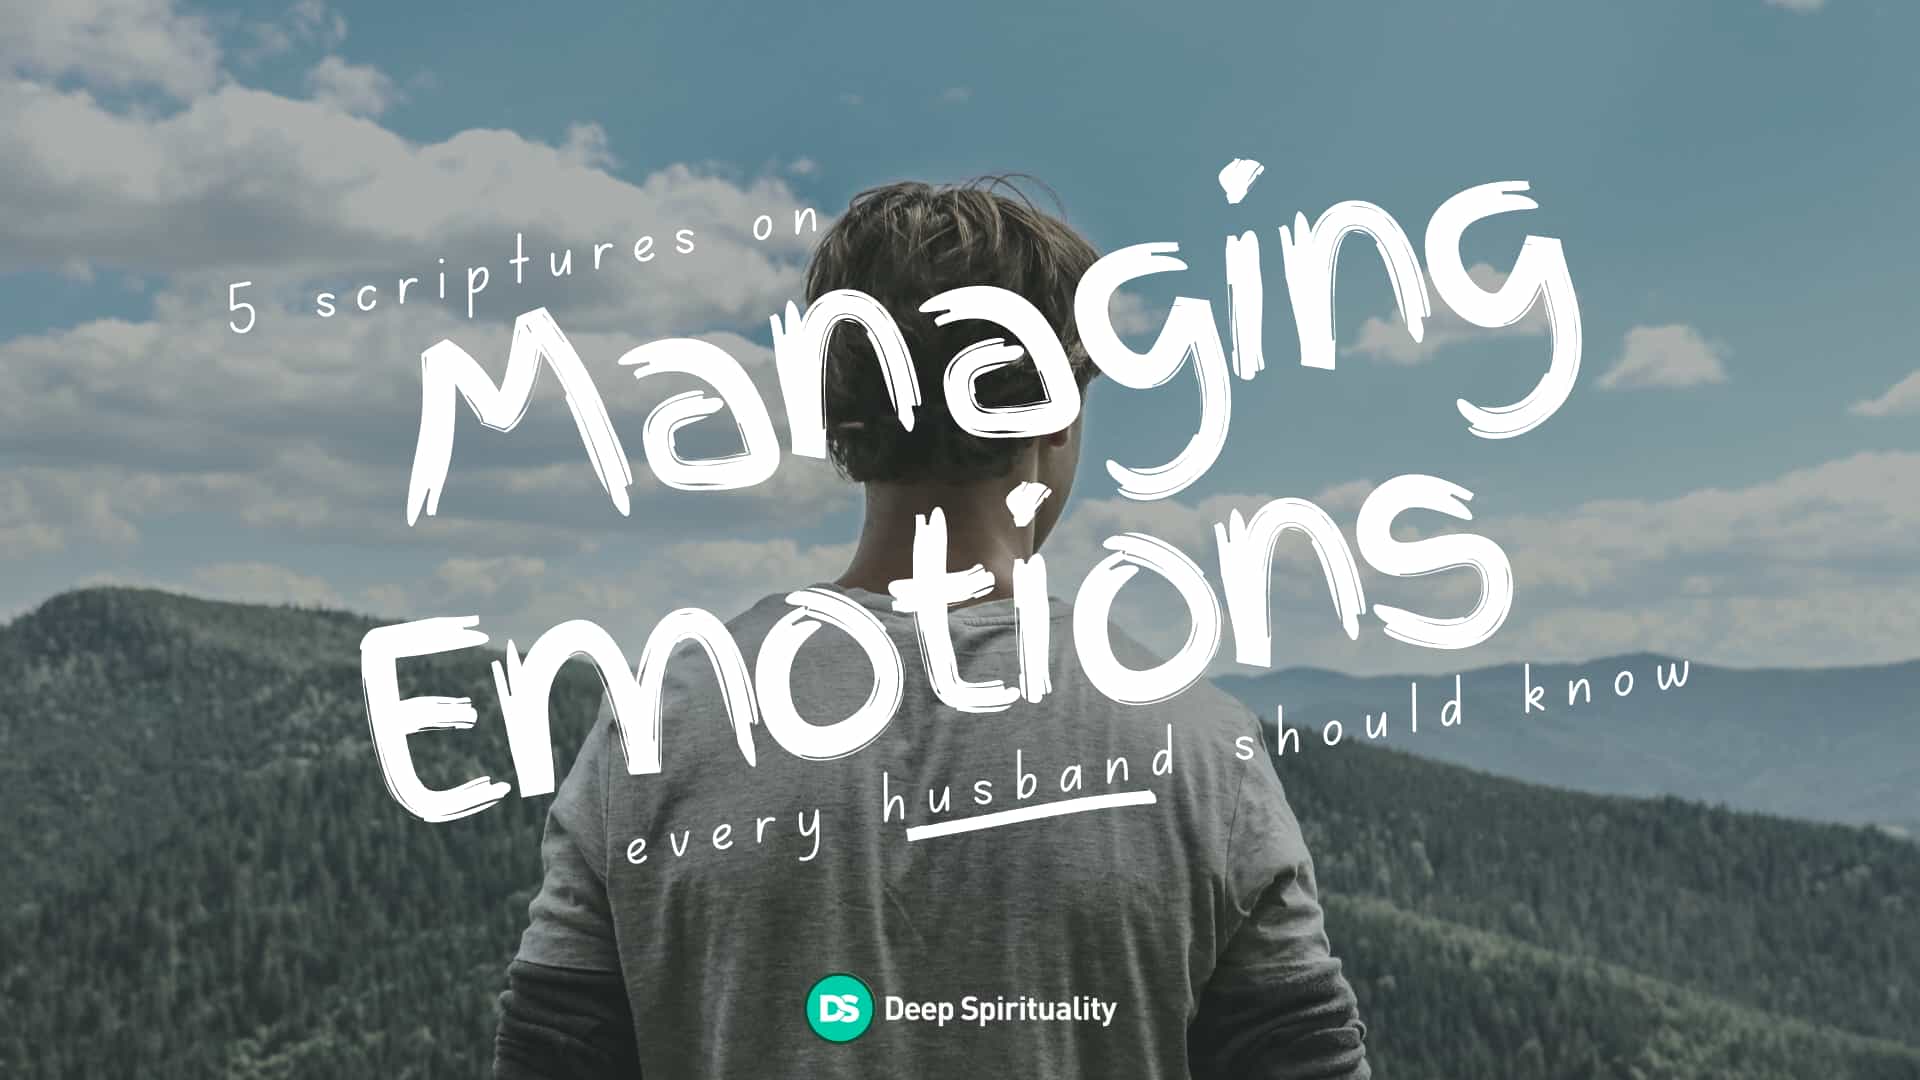 5 Scriptures on Managing Emotions Every Husband Should Know 12